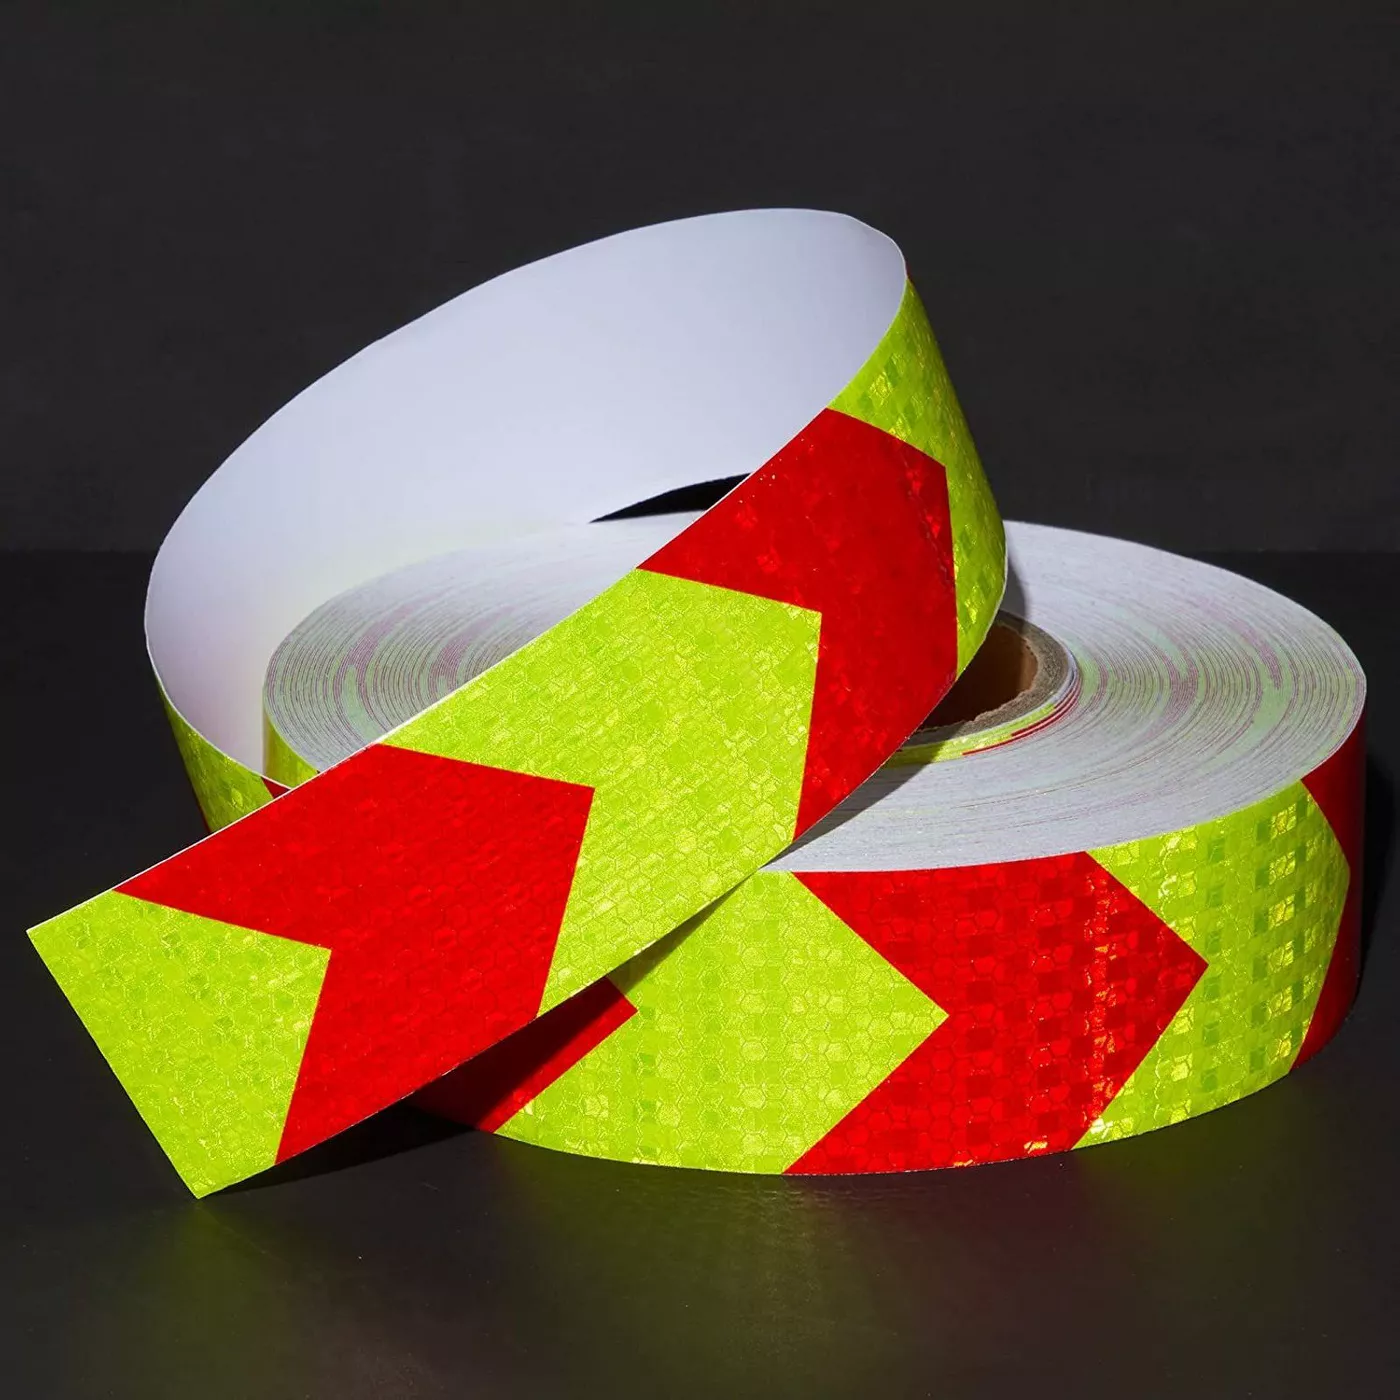  Road Safety Warning Signs Truck Arrow Reflective Tape